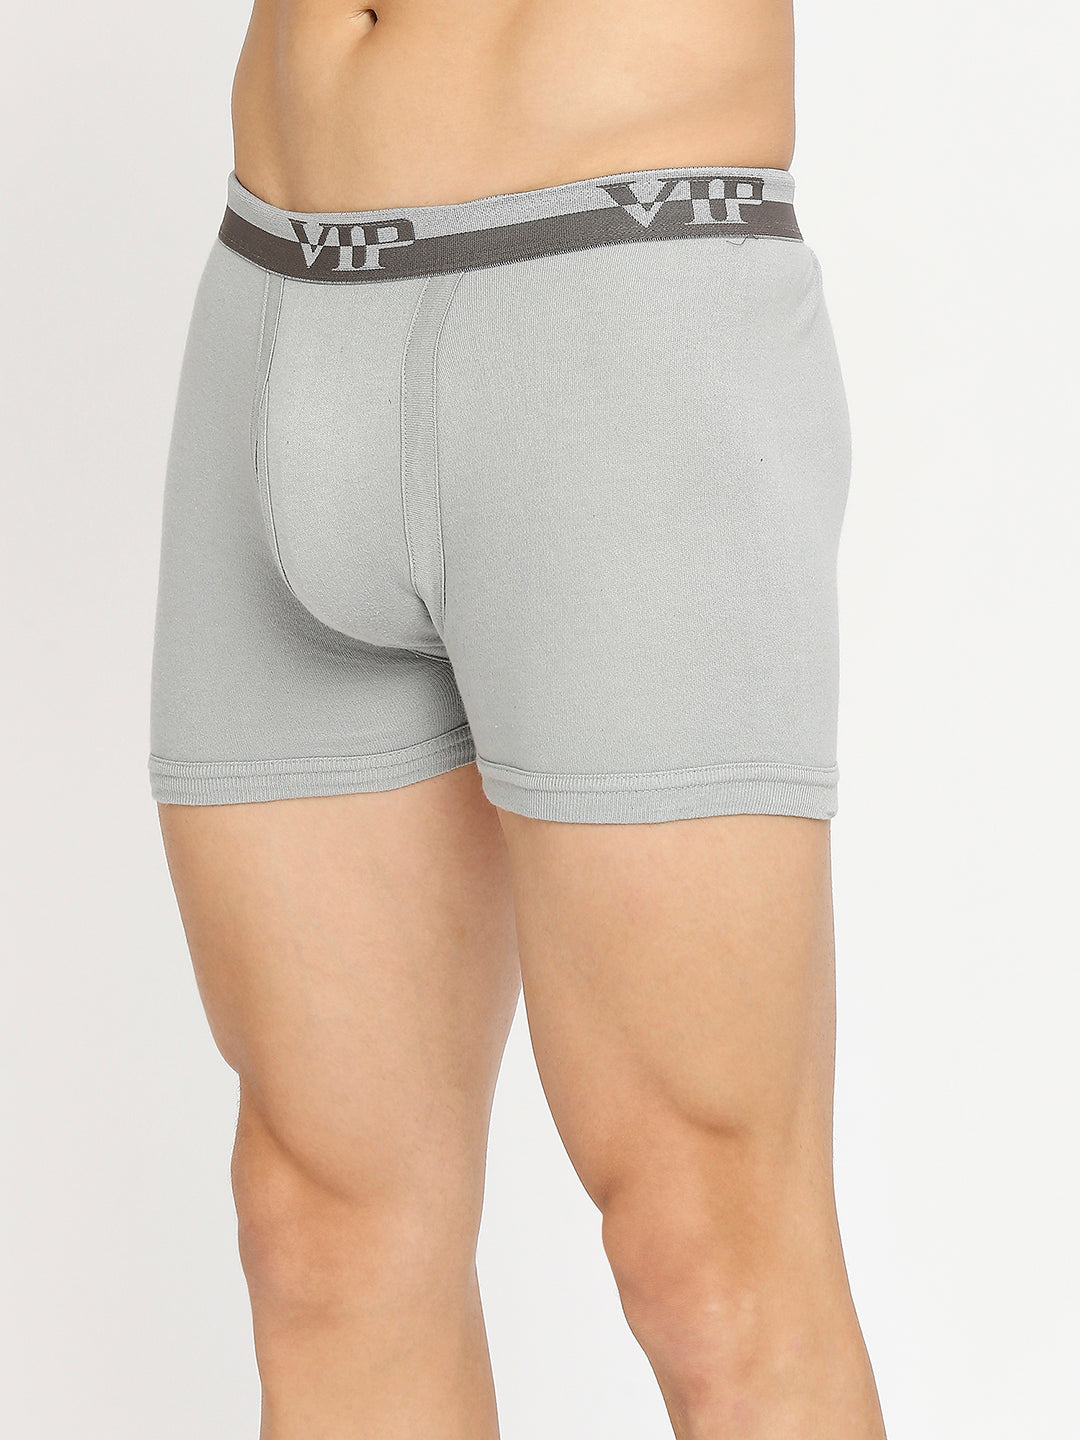 VIP Ultra 100% Soft Cotton Trunks for Men | Assorted Colours - AS02